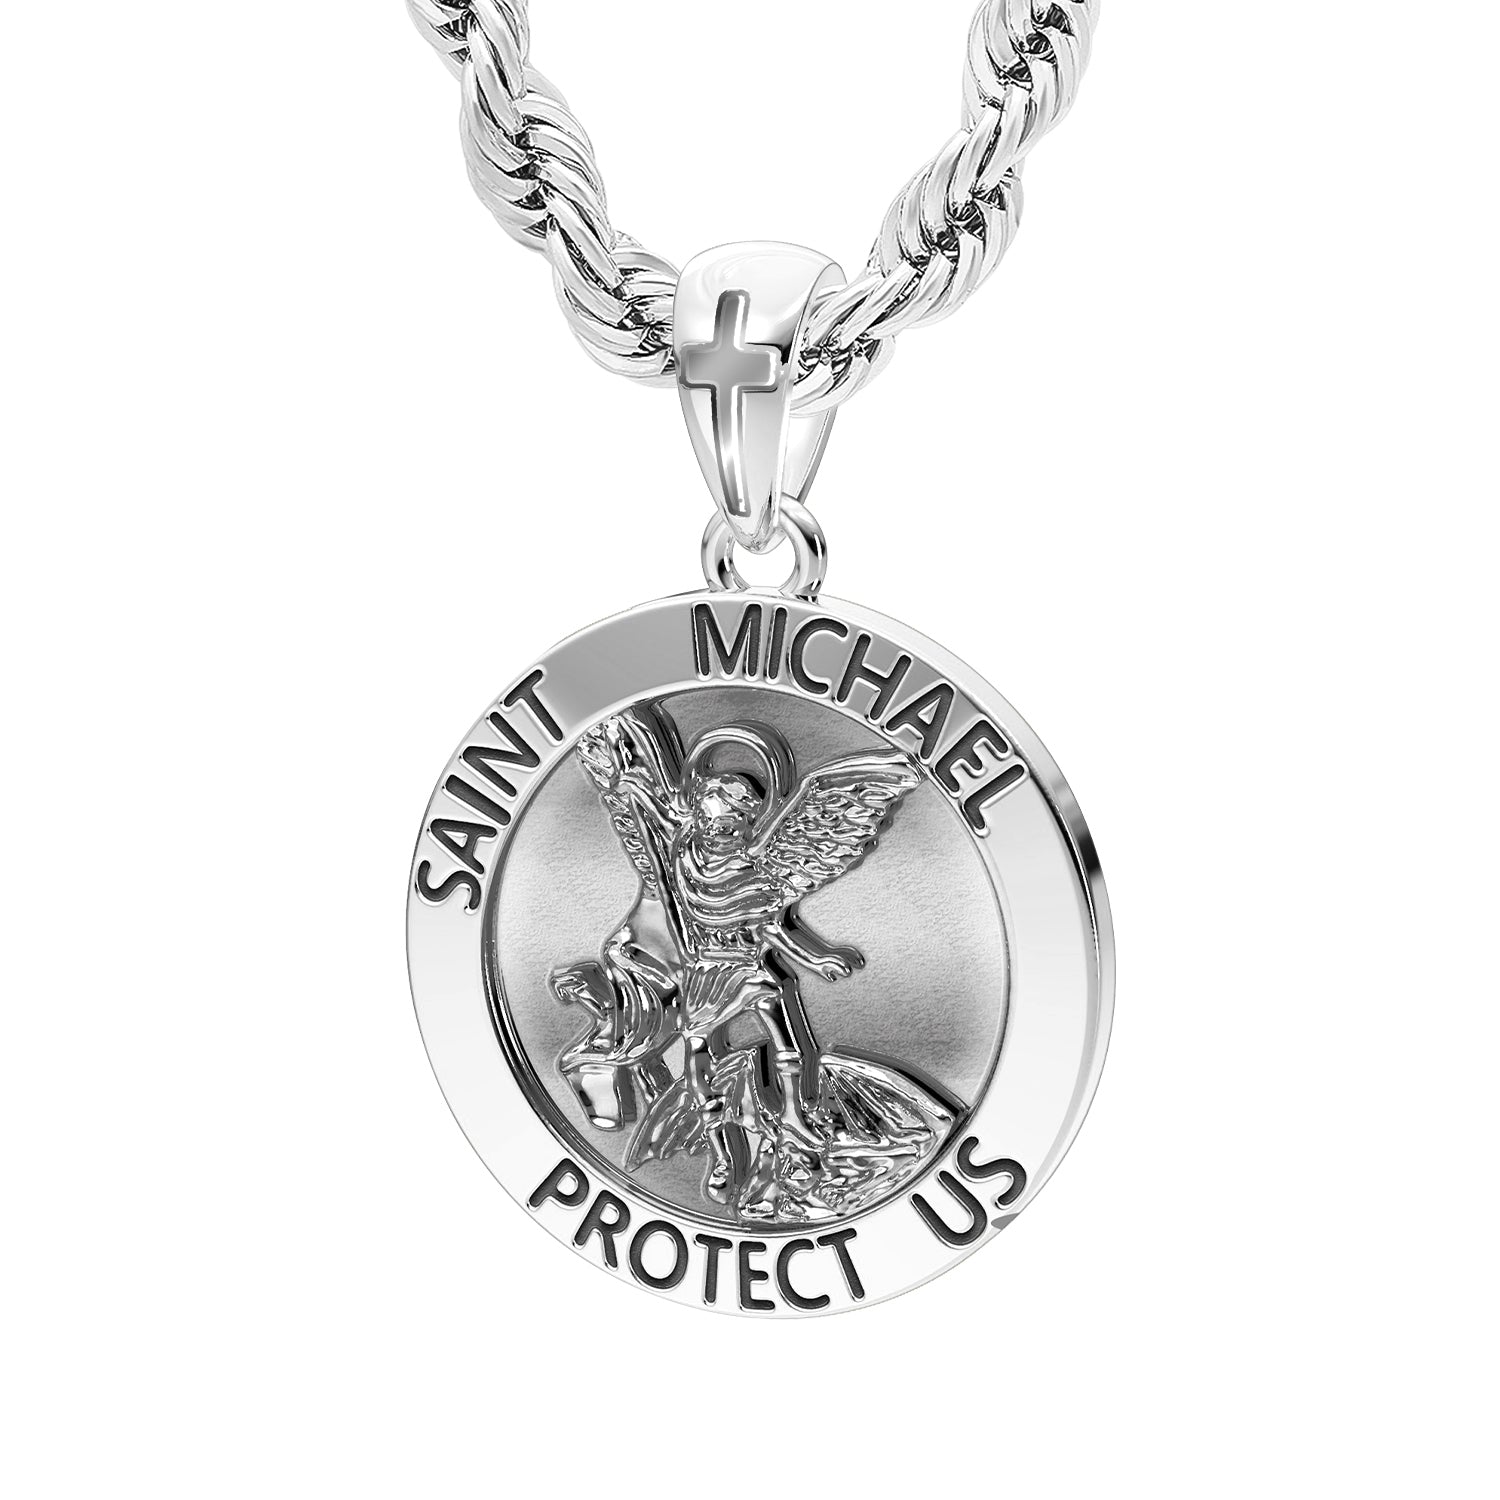 Men's XL 925 Sterling Silver 1.25in St Saint Michael Medal Antique Finish  Round Pendant Necklace, 32mm - 22in 3mm Rope Chain